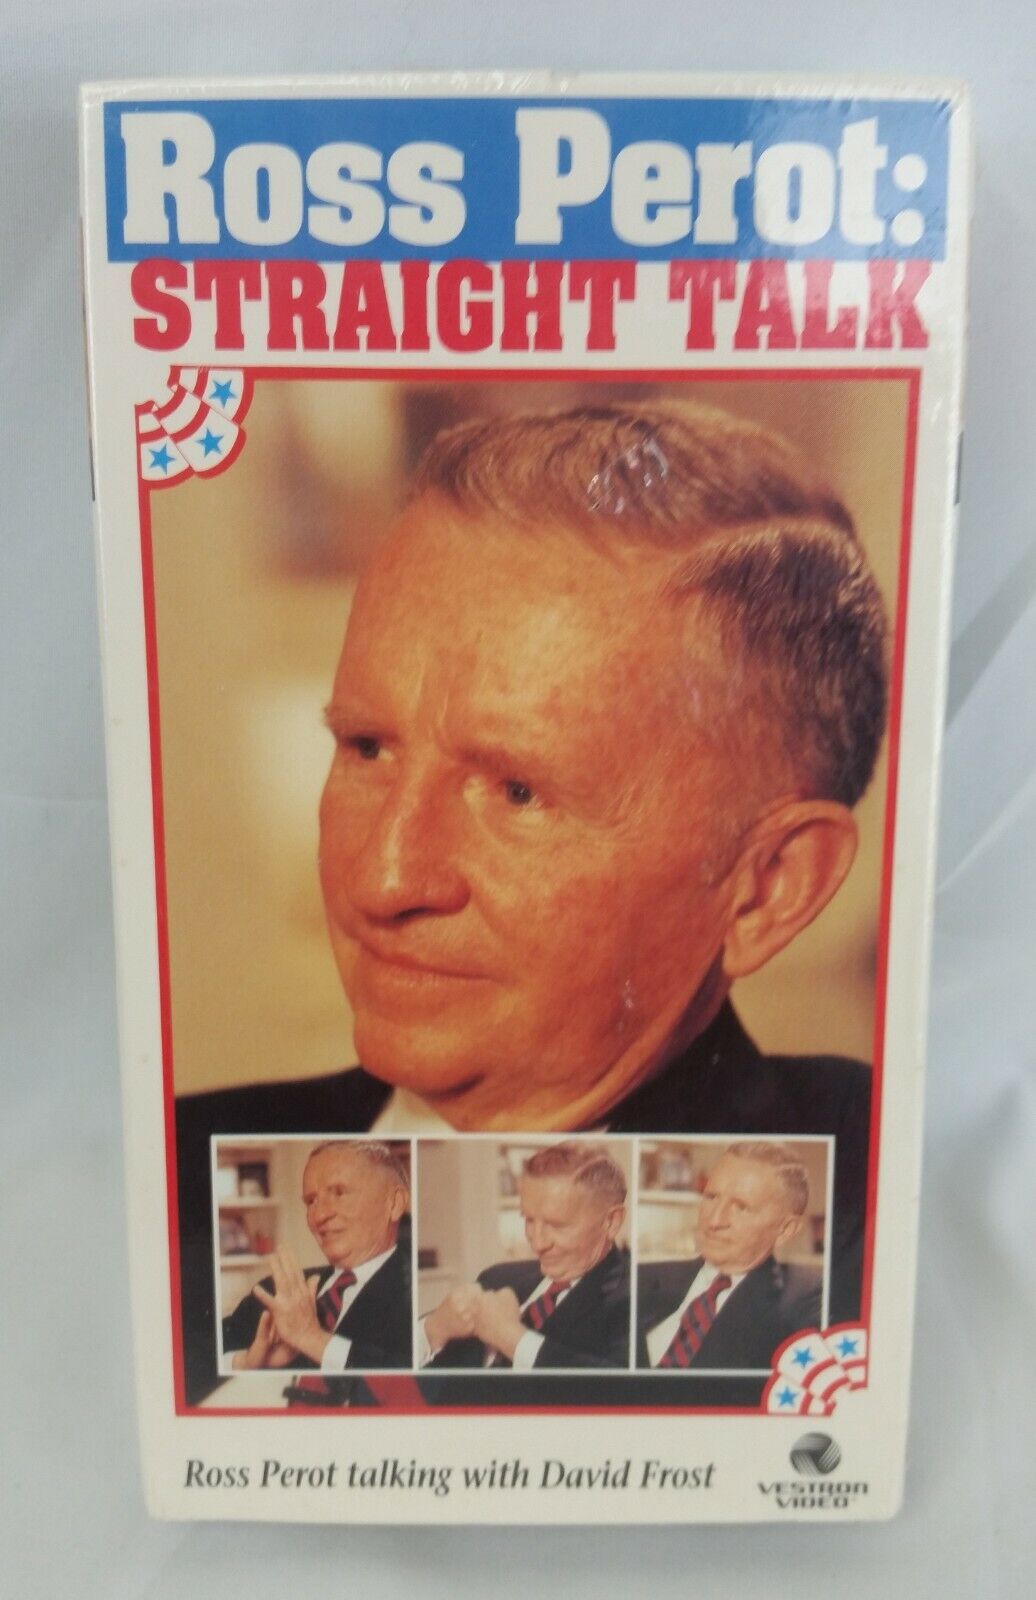 Ross Perot Straight Talk (Factory Sealed VHS 1992) Talking with David Frost